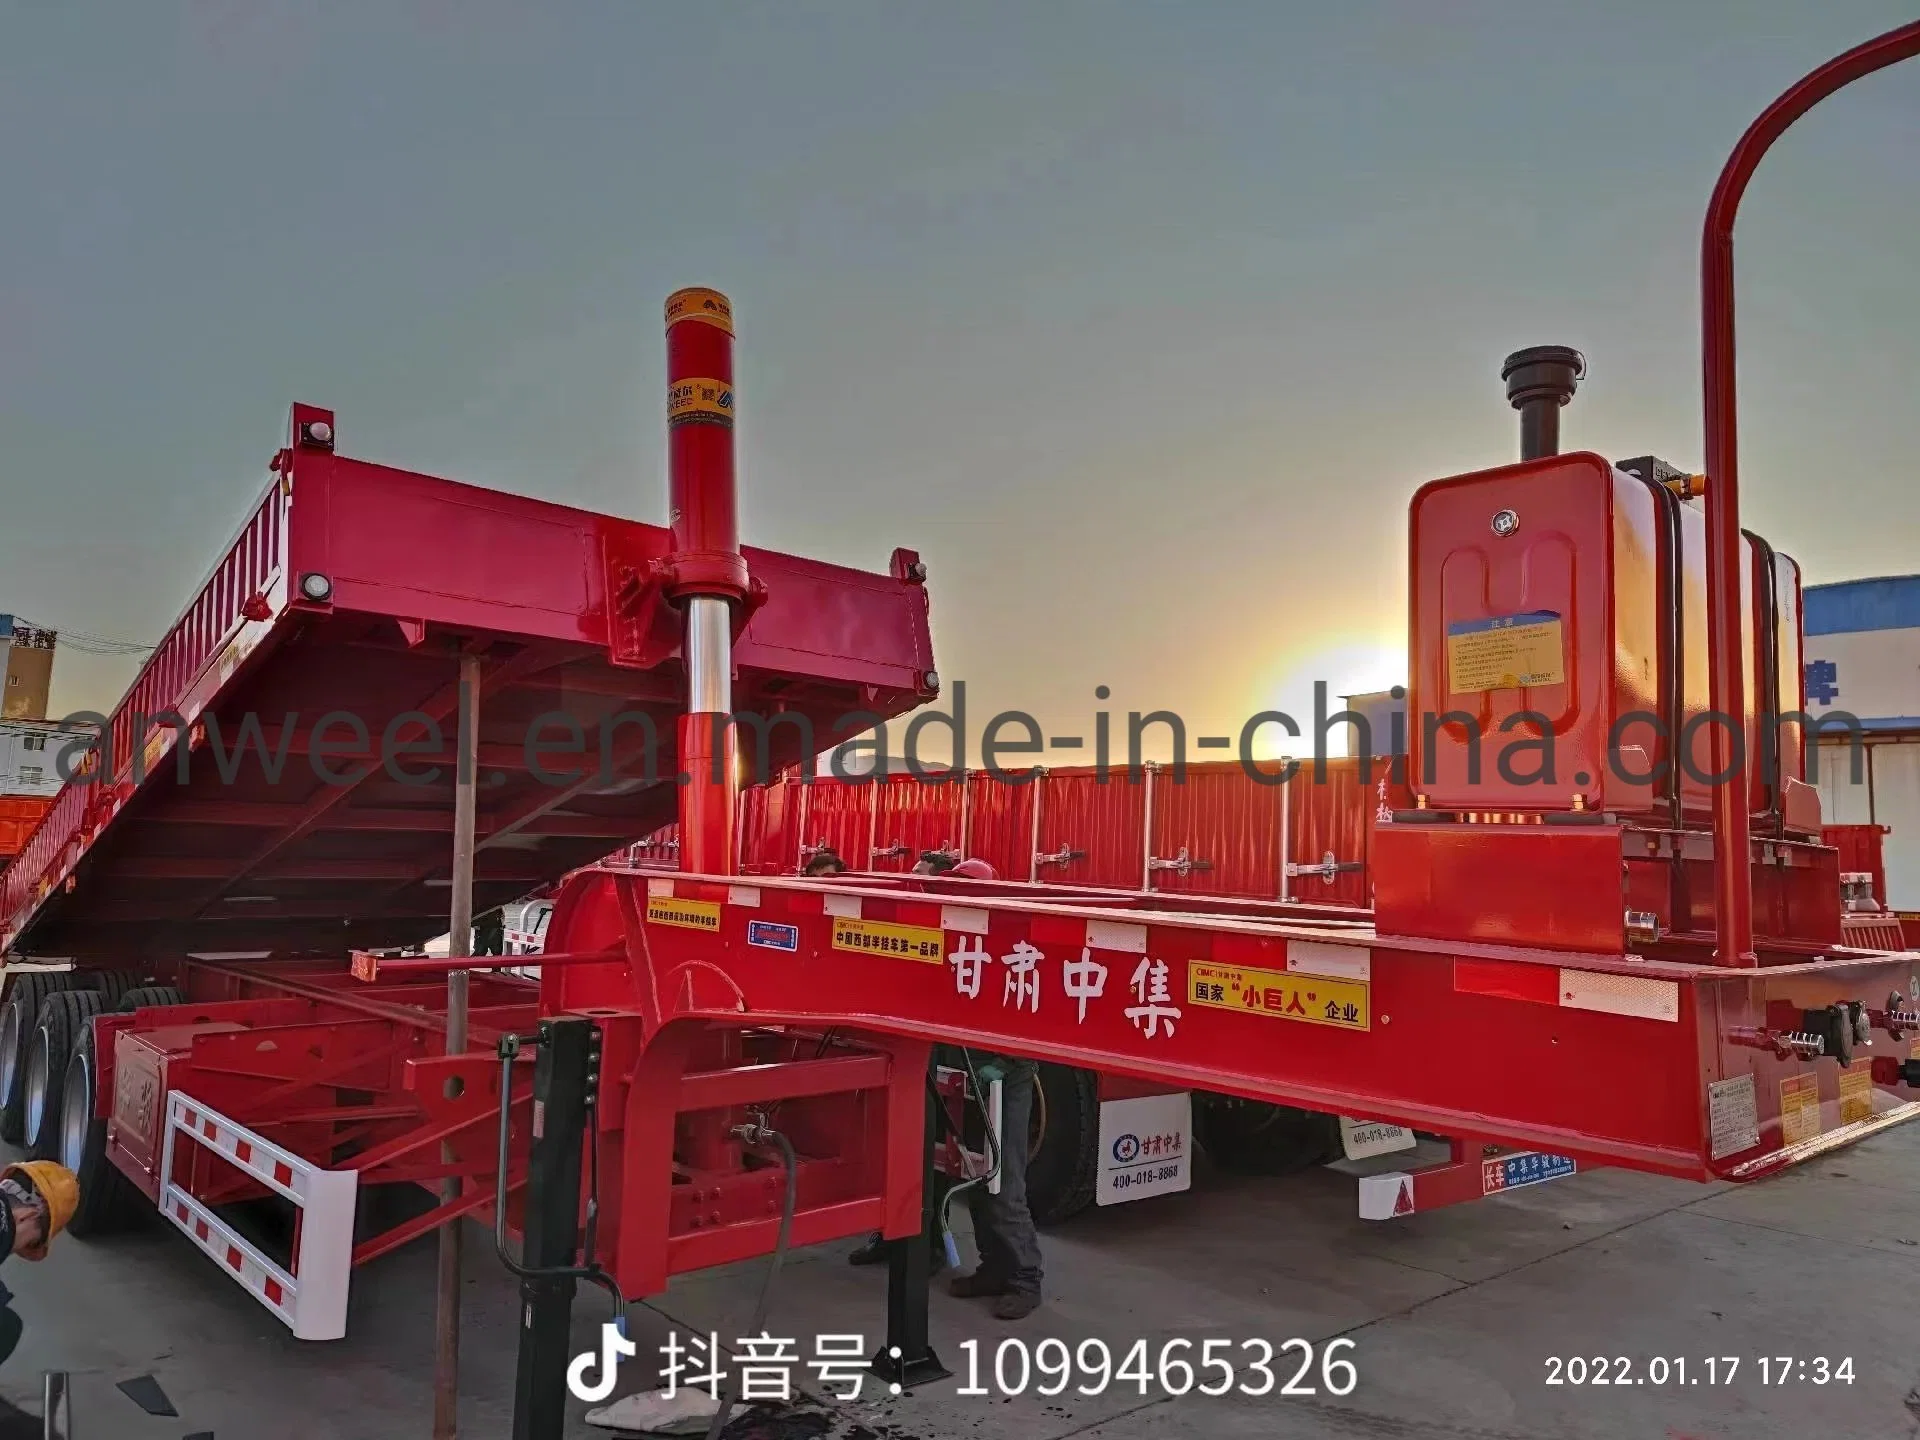 Fe or FC Series Telescopic Hydraulic Oil Cylinders for Dump Truck